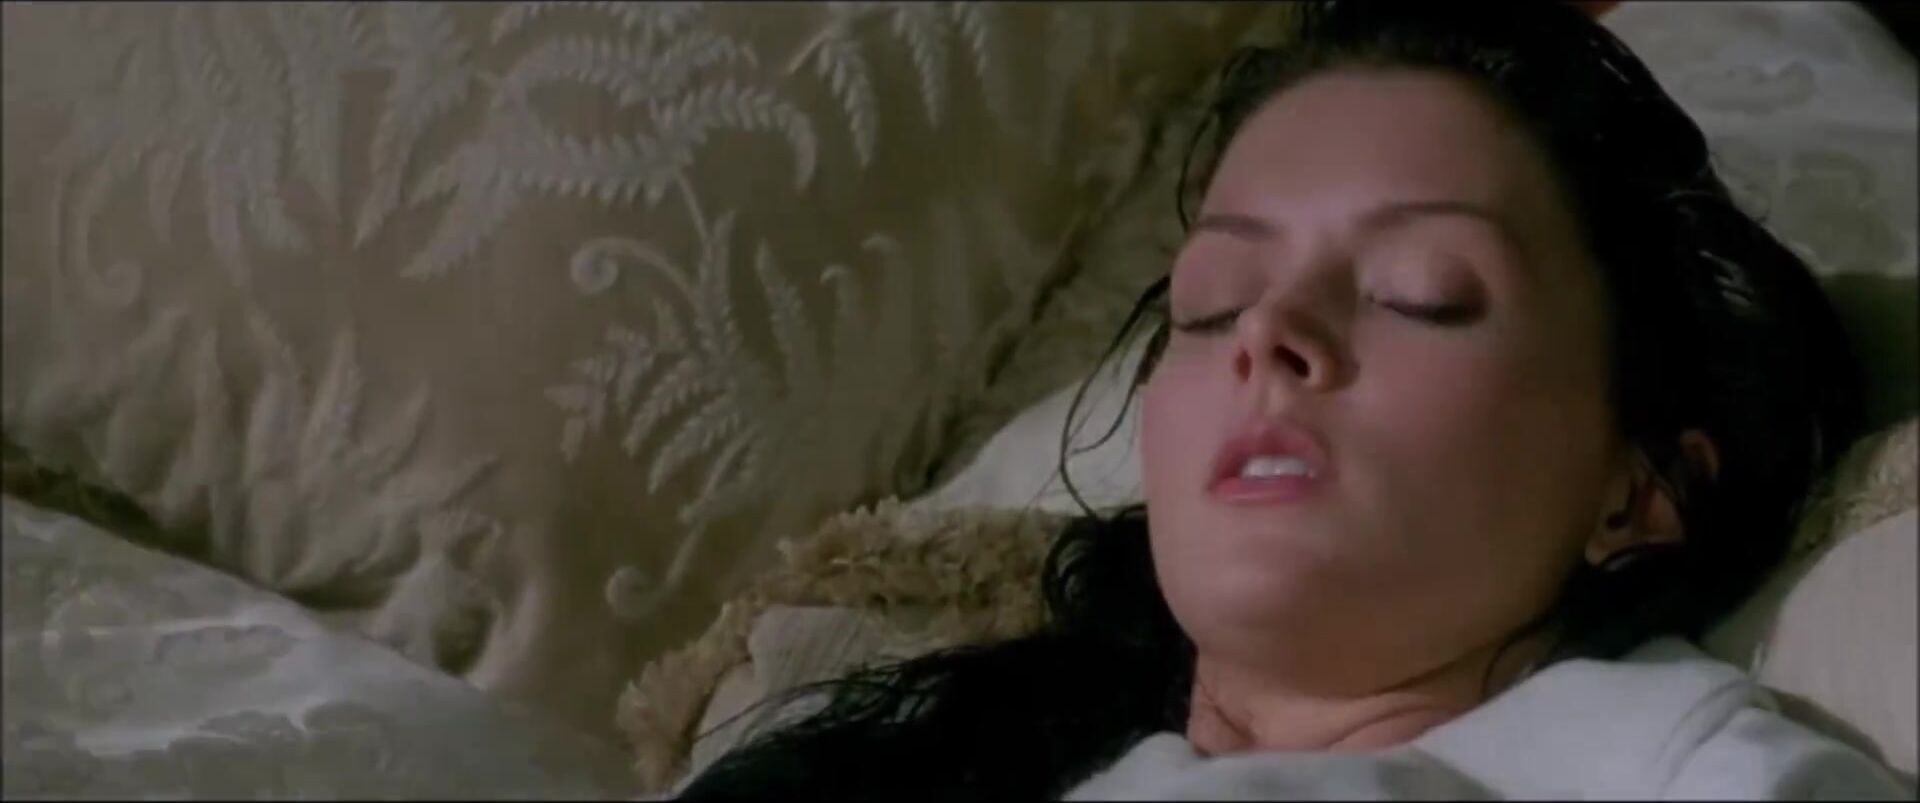 Penis Sucking Girl doesn't get murdered by hitman but drilled in bed in retro film Crying Freeman (1995) Big Ass - 1